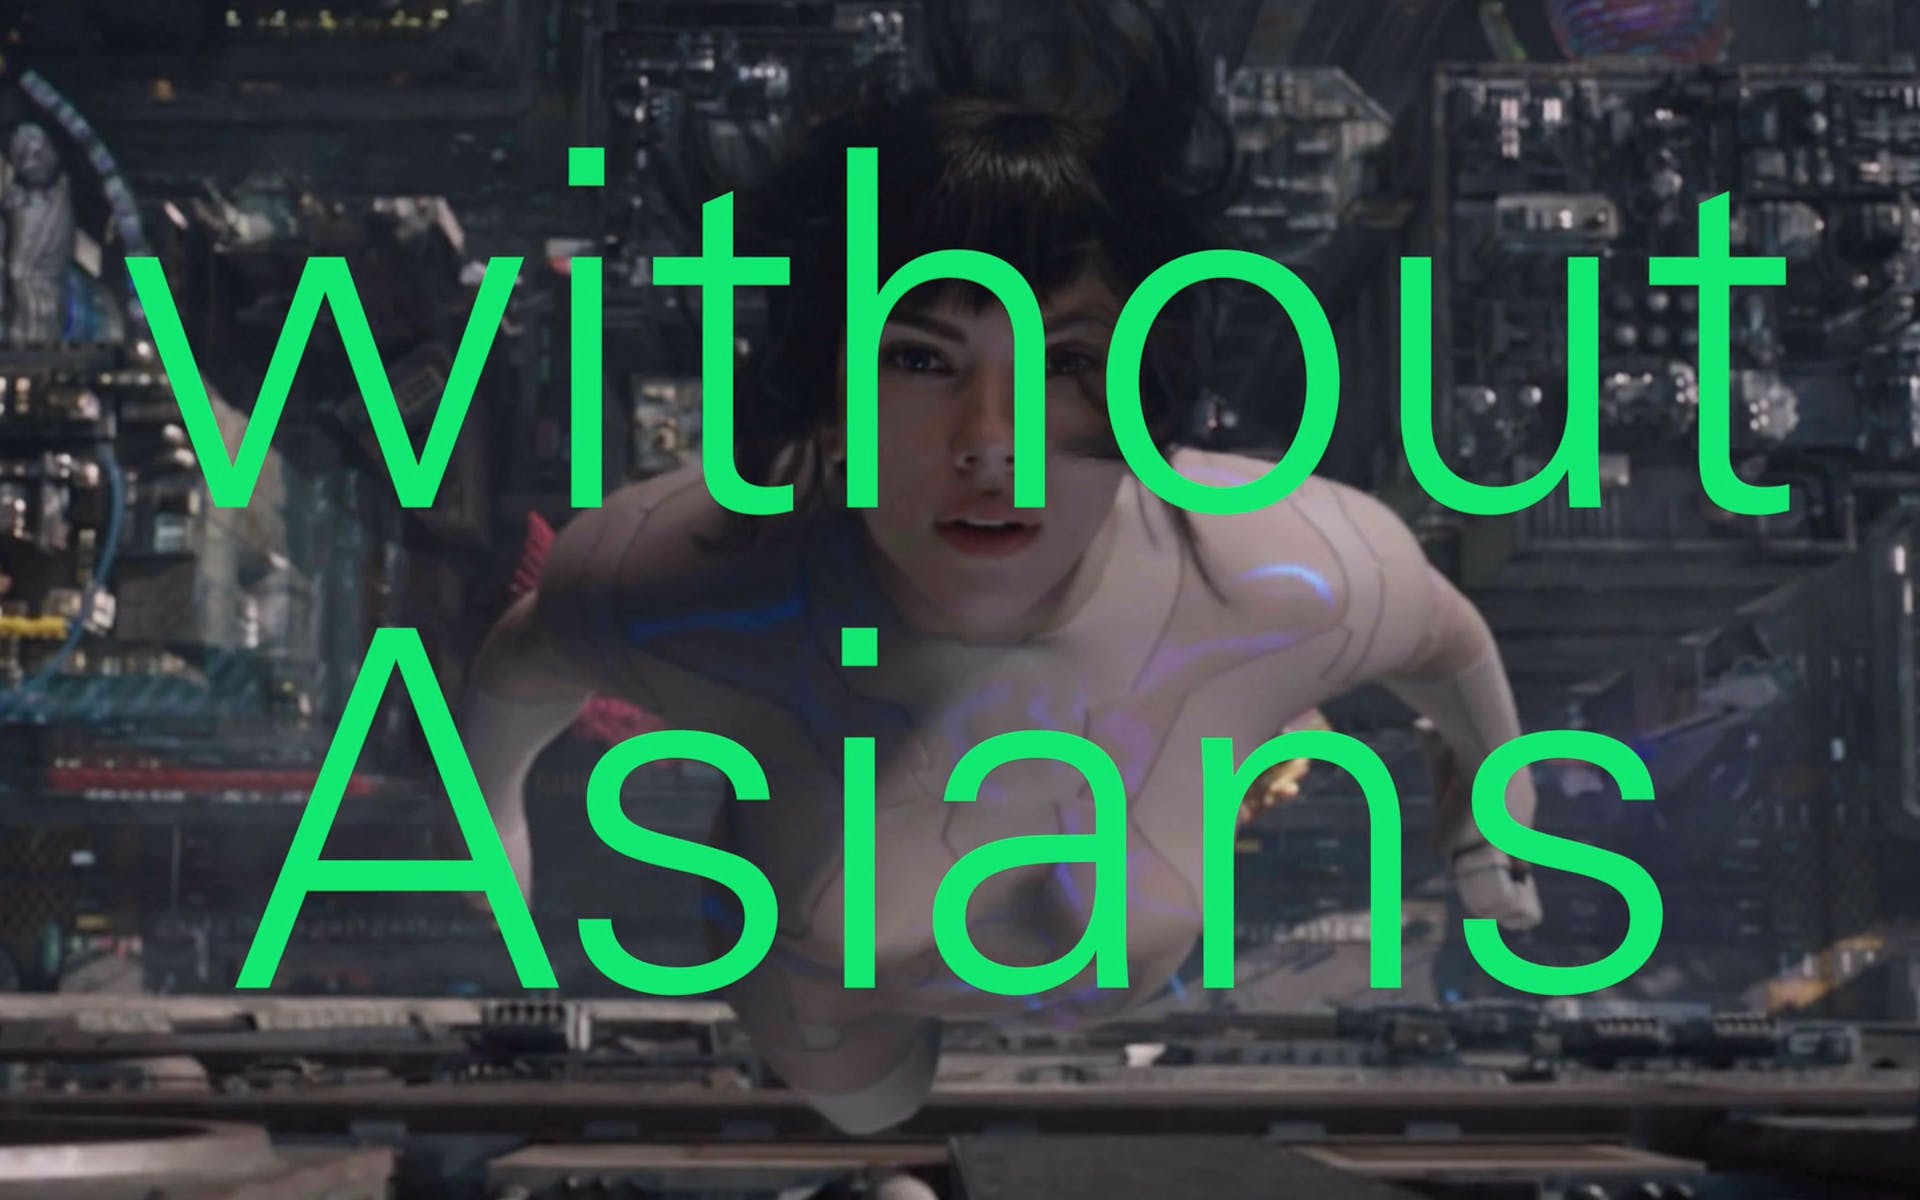 looking down at a woman falling from a tall building, with the text “without Asians” in green foregrounding the image.